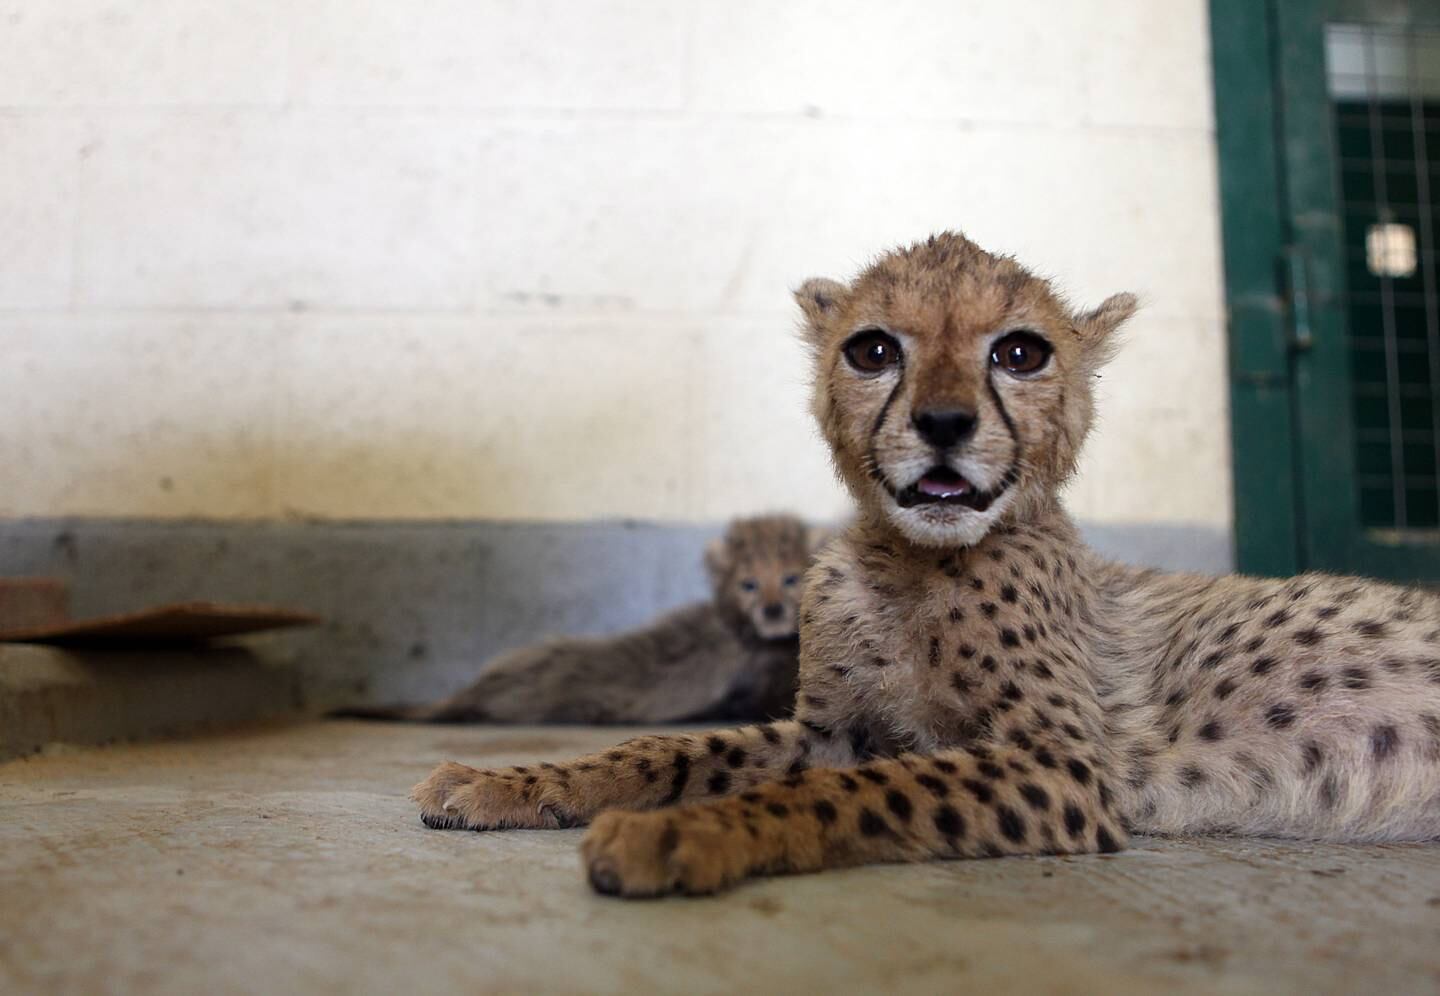 June 13, 2010/ Al Ain/ The Al Ain Zoo has received a few cheetah cubs that somebody was trying to smuggle into Dubai. Out of the 15 cheetahs smuggled in 10 have died June 13, 2010. (Sammy Dallal / The National)

